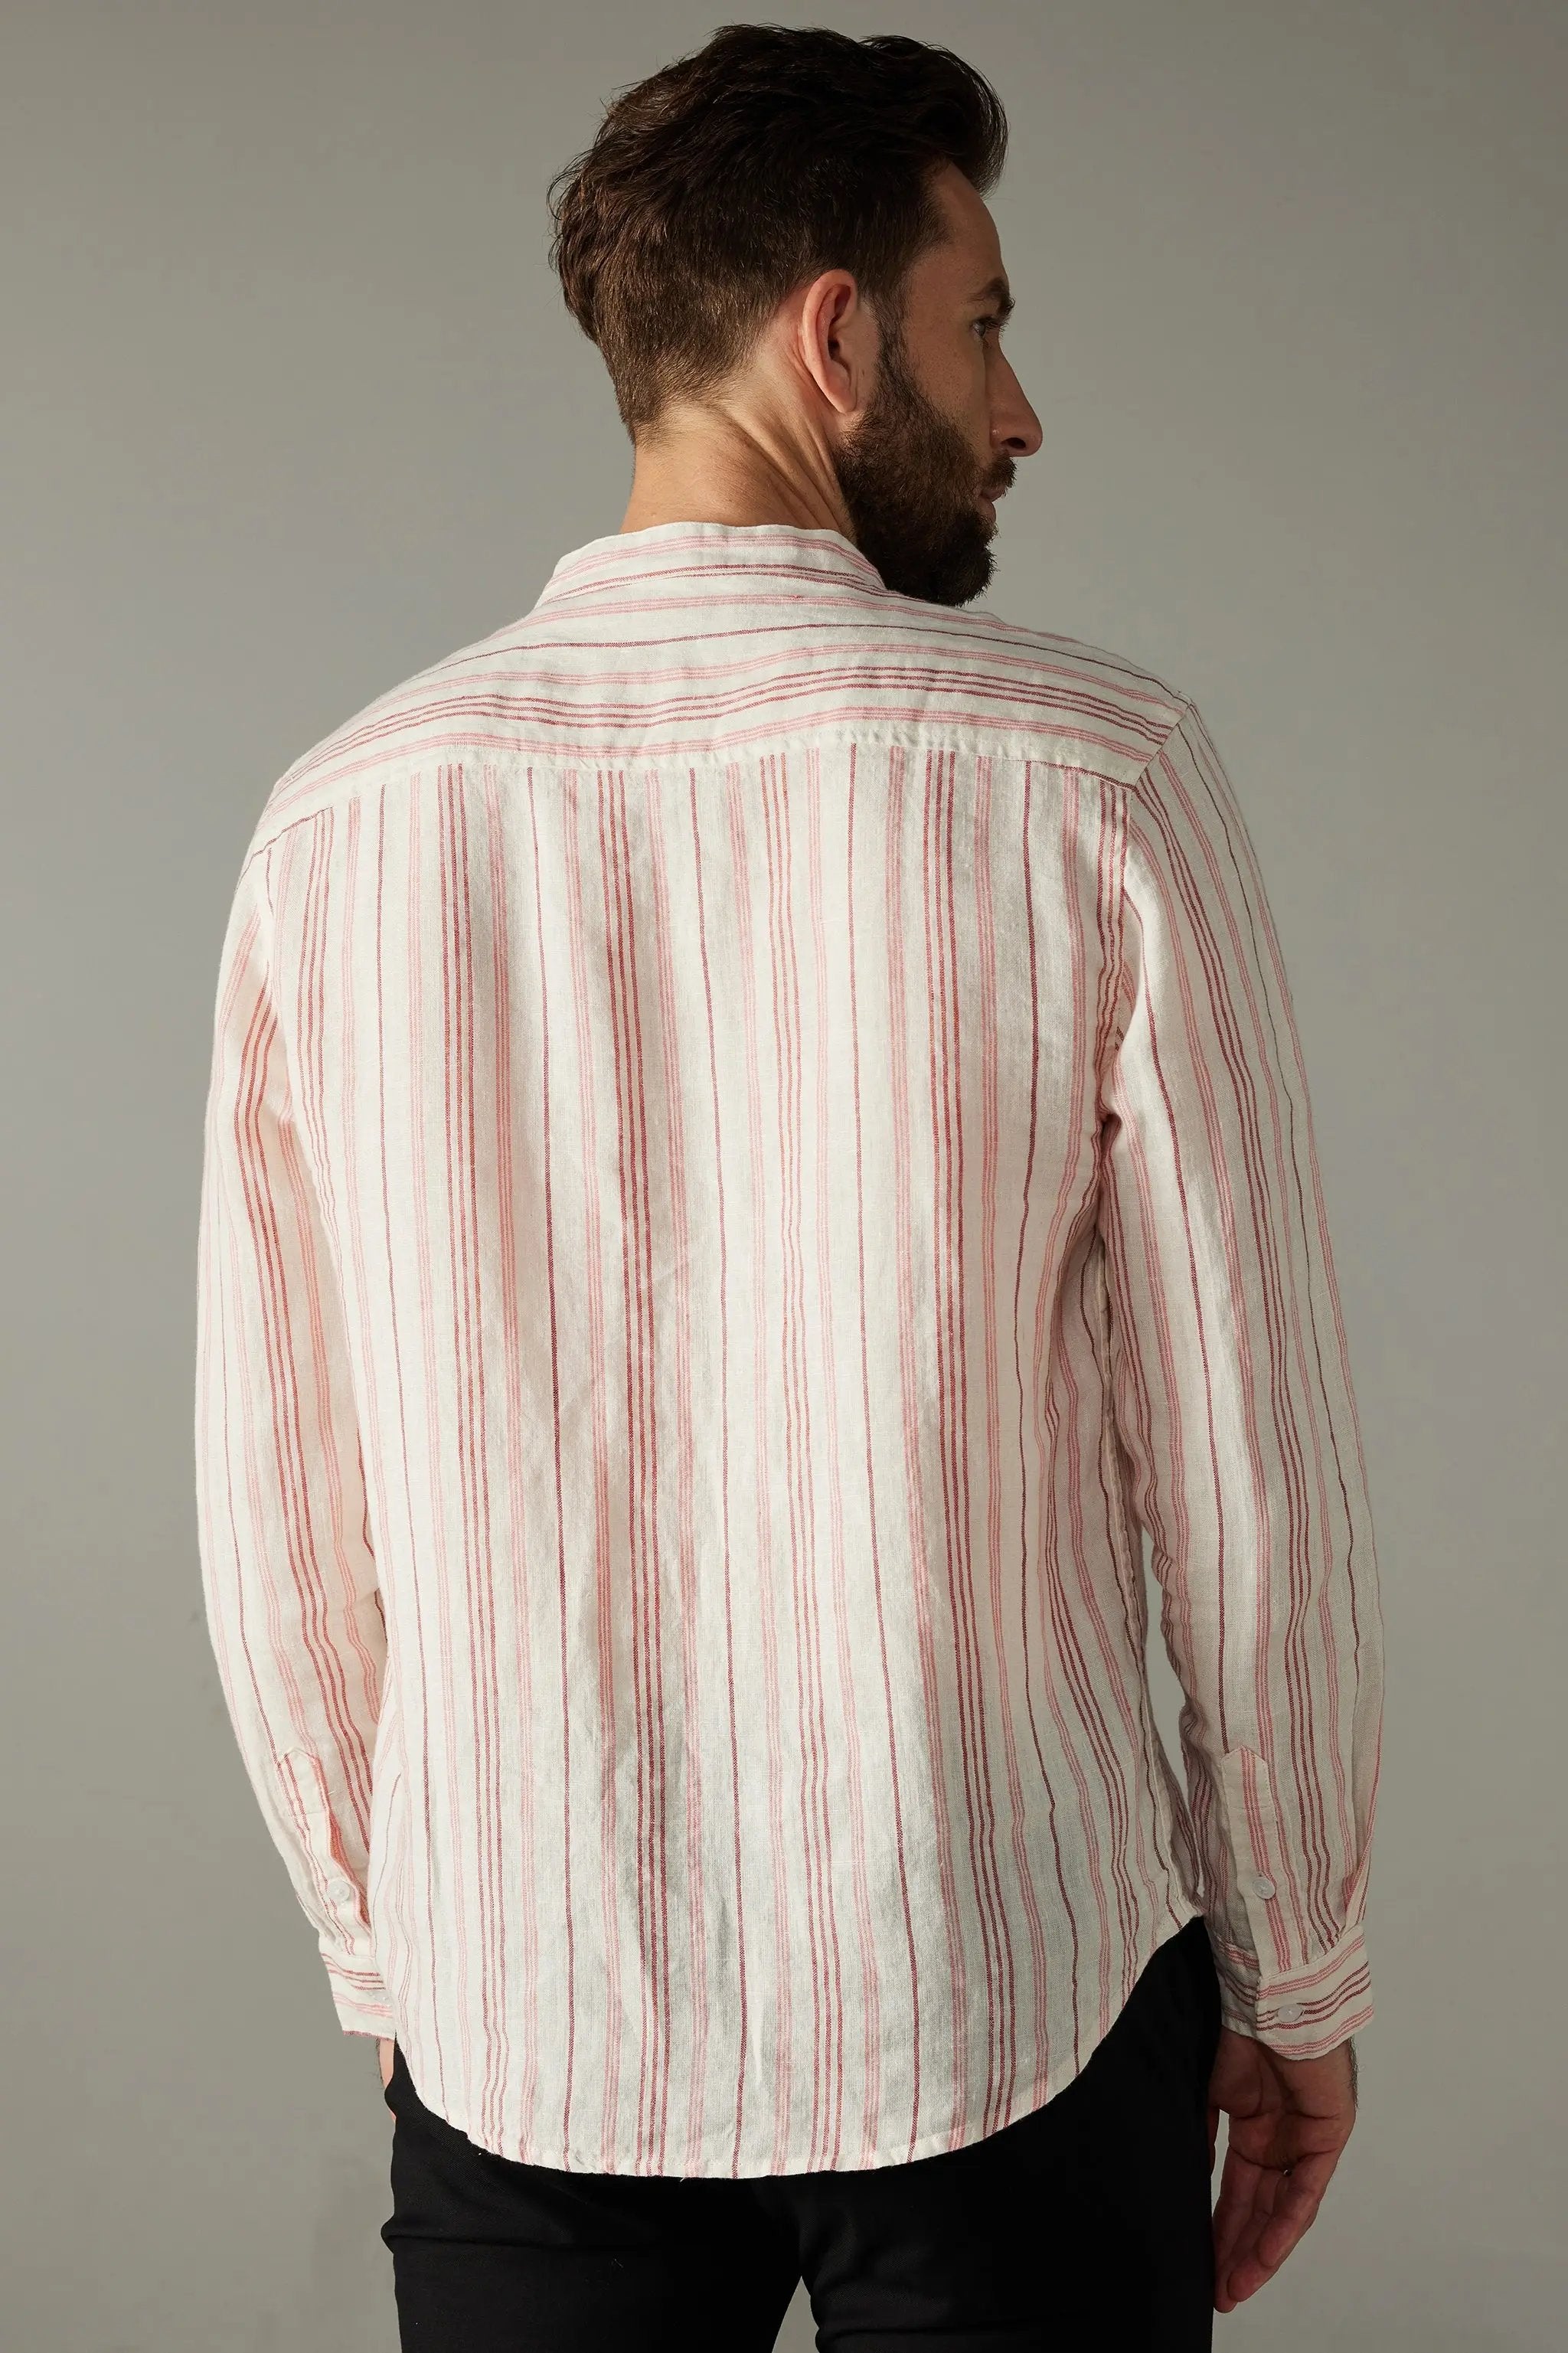 a man with a beard wearing a red and white striped shirt